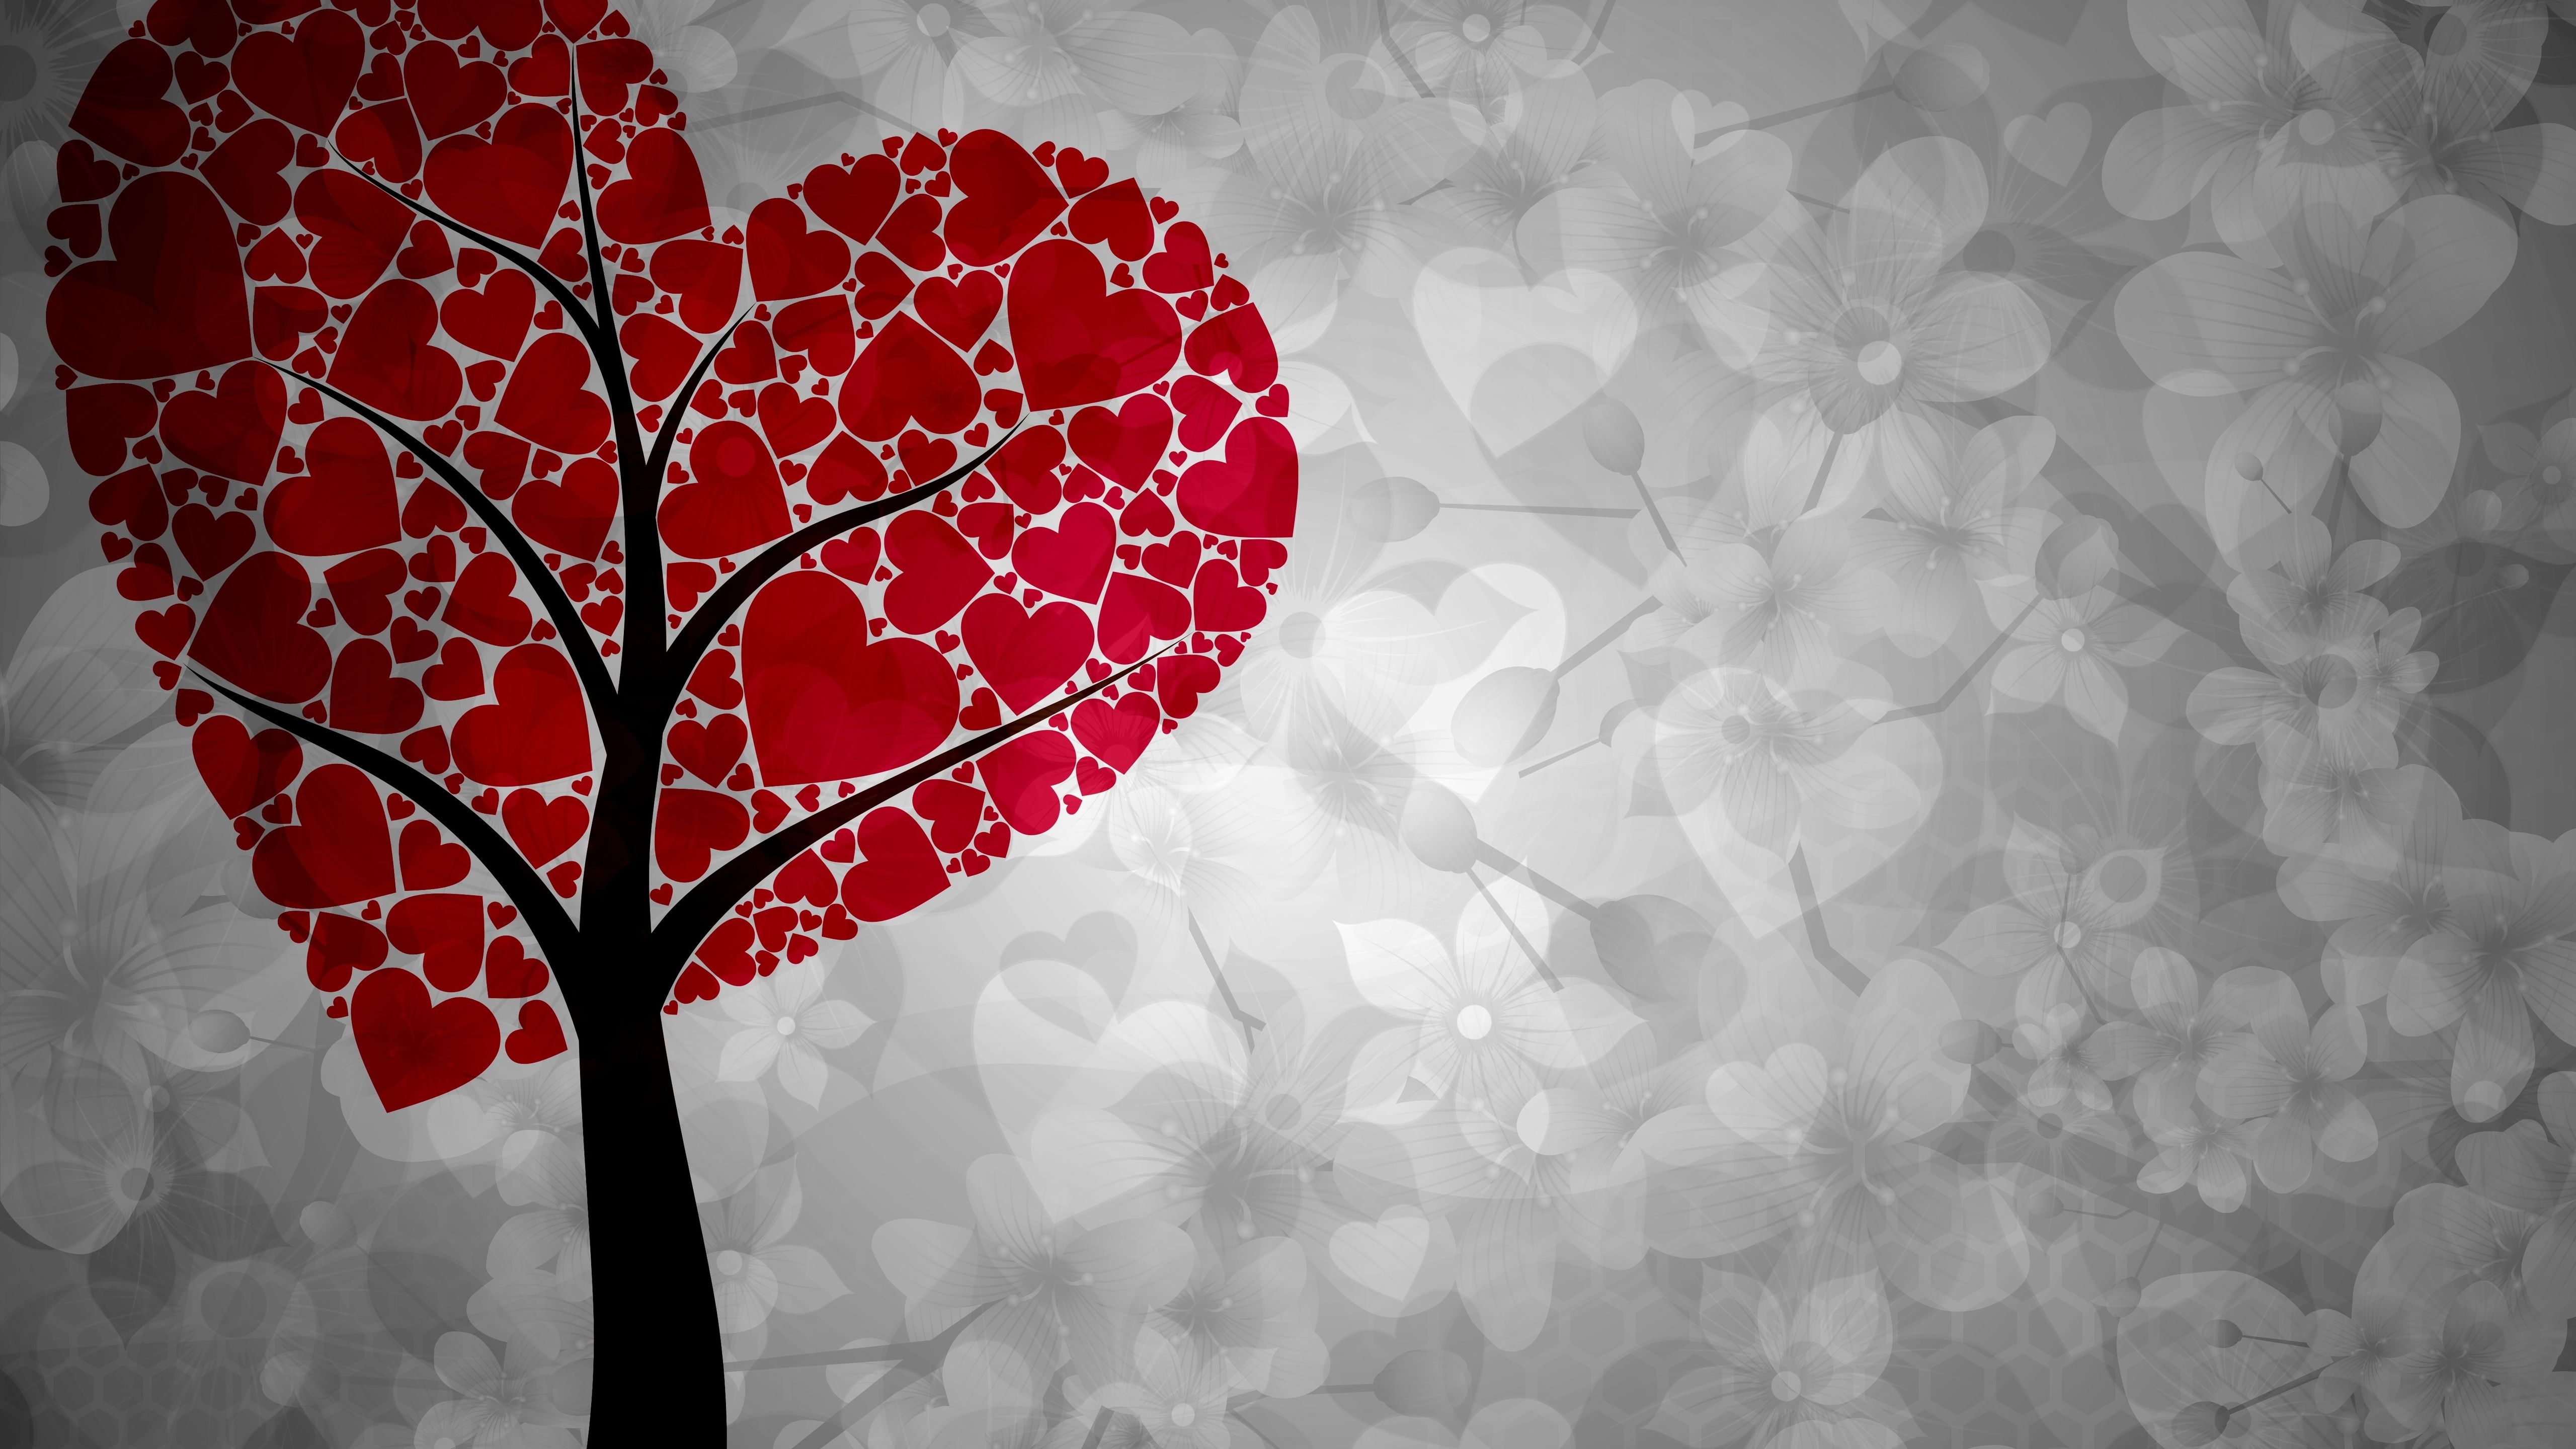 Artistic Heart Tree 5k HD 4k Wallpaper, Image, Background, Photo and Picture